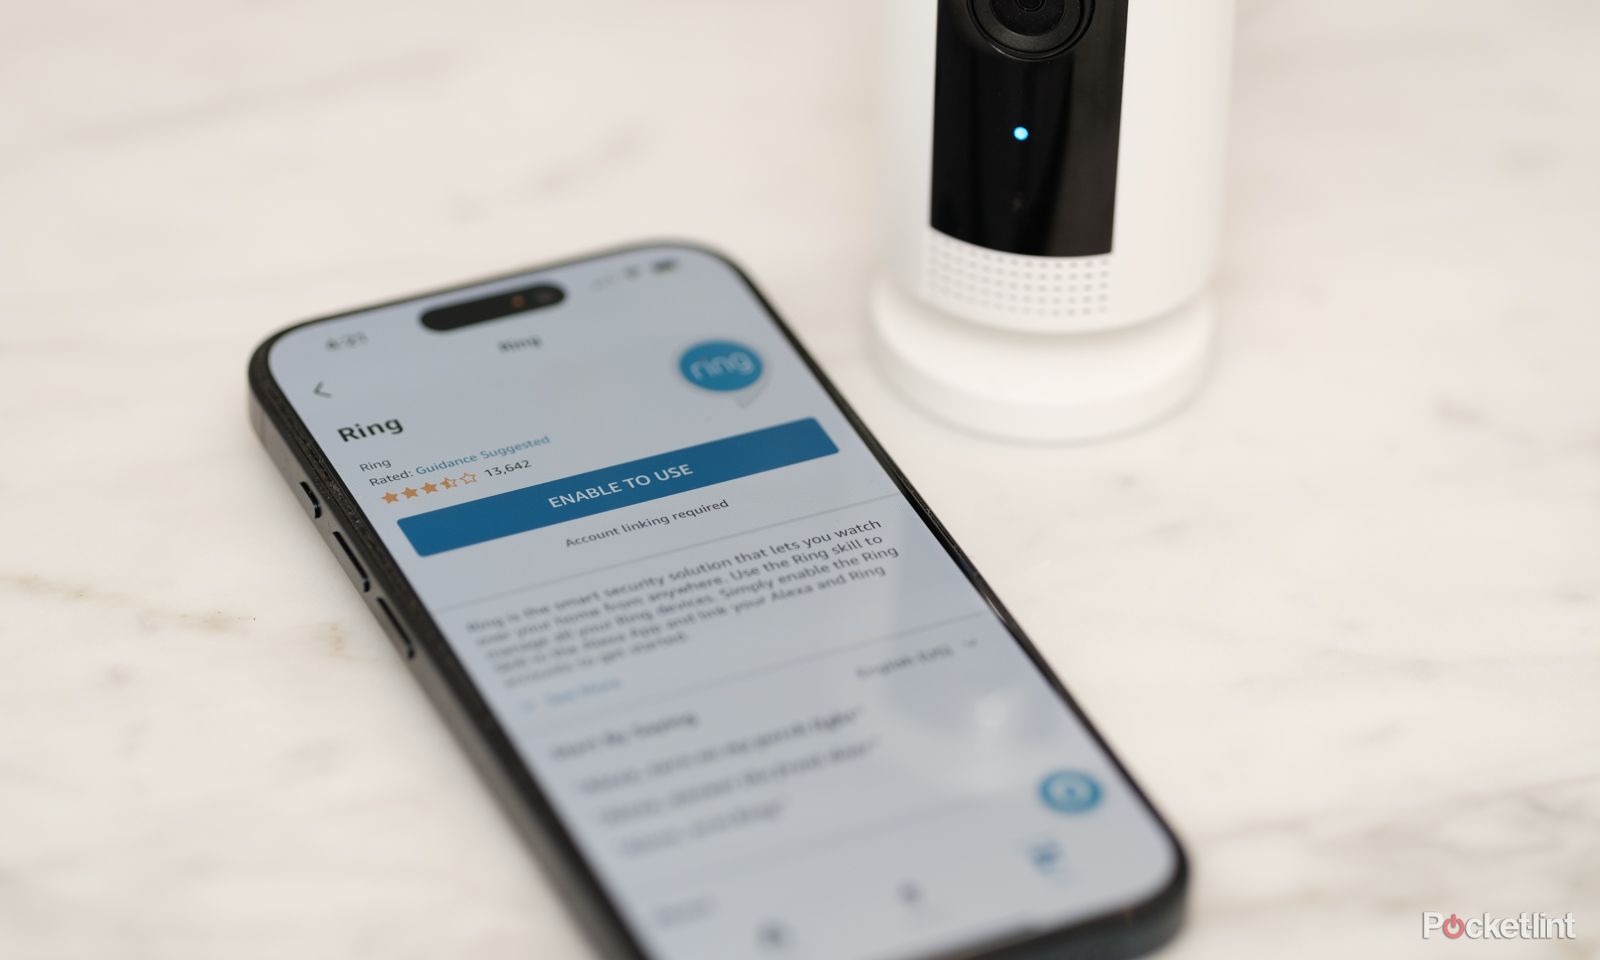 to roll out Matter for Alexa smart home devices next month